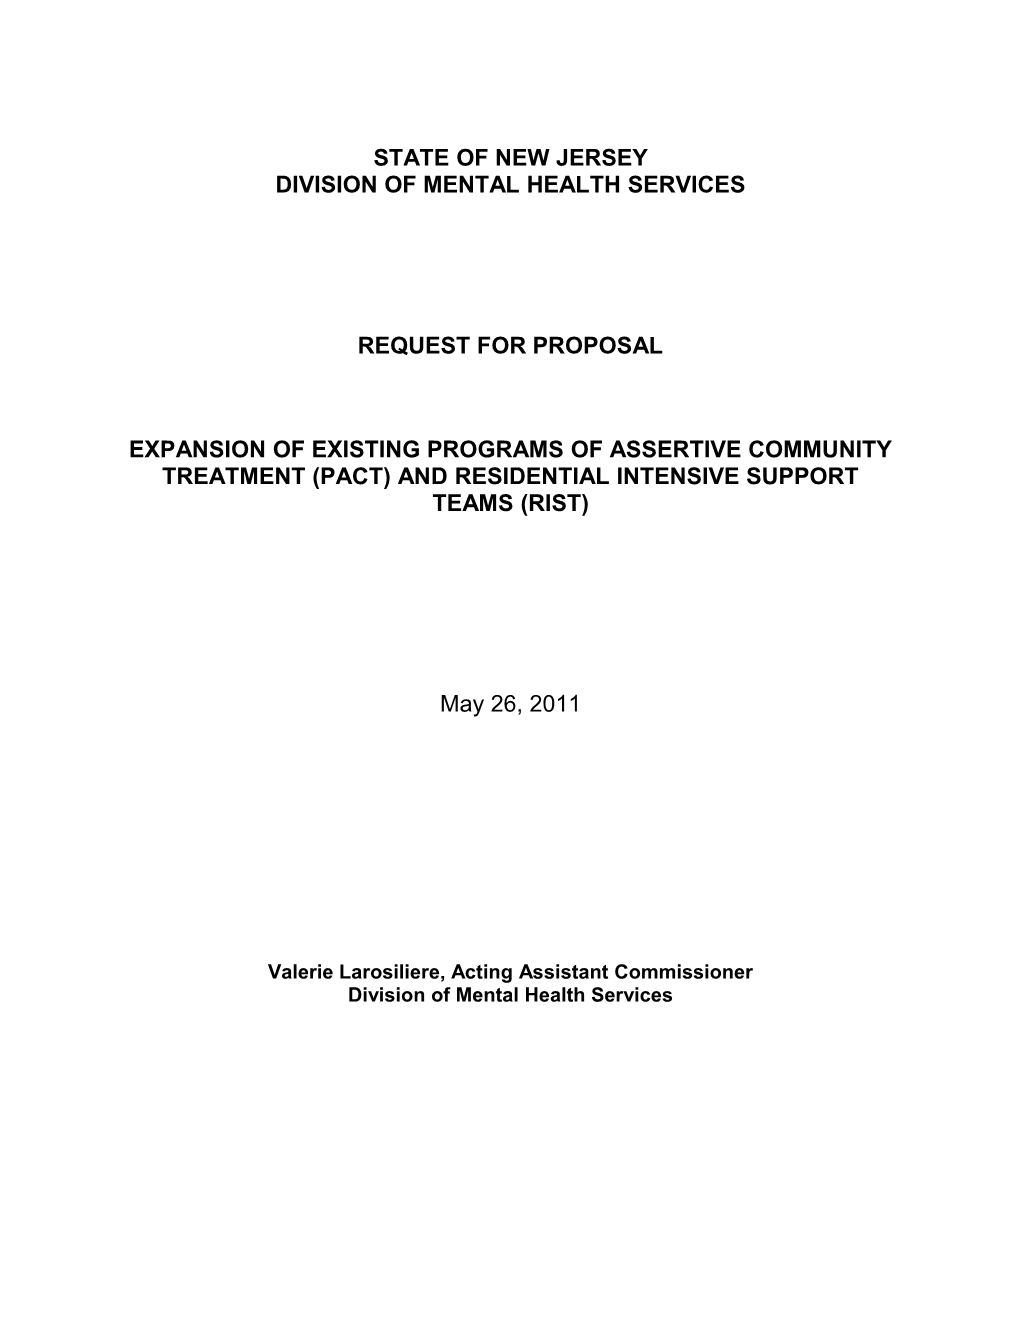 Division of Mental Health Services